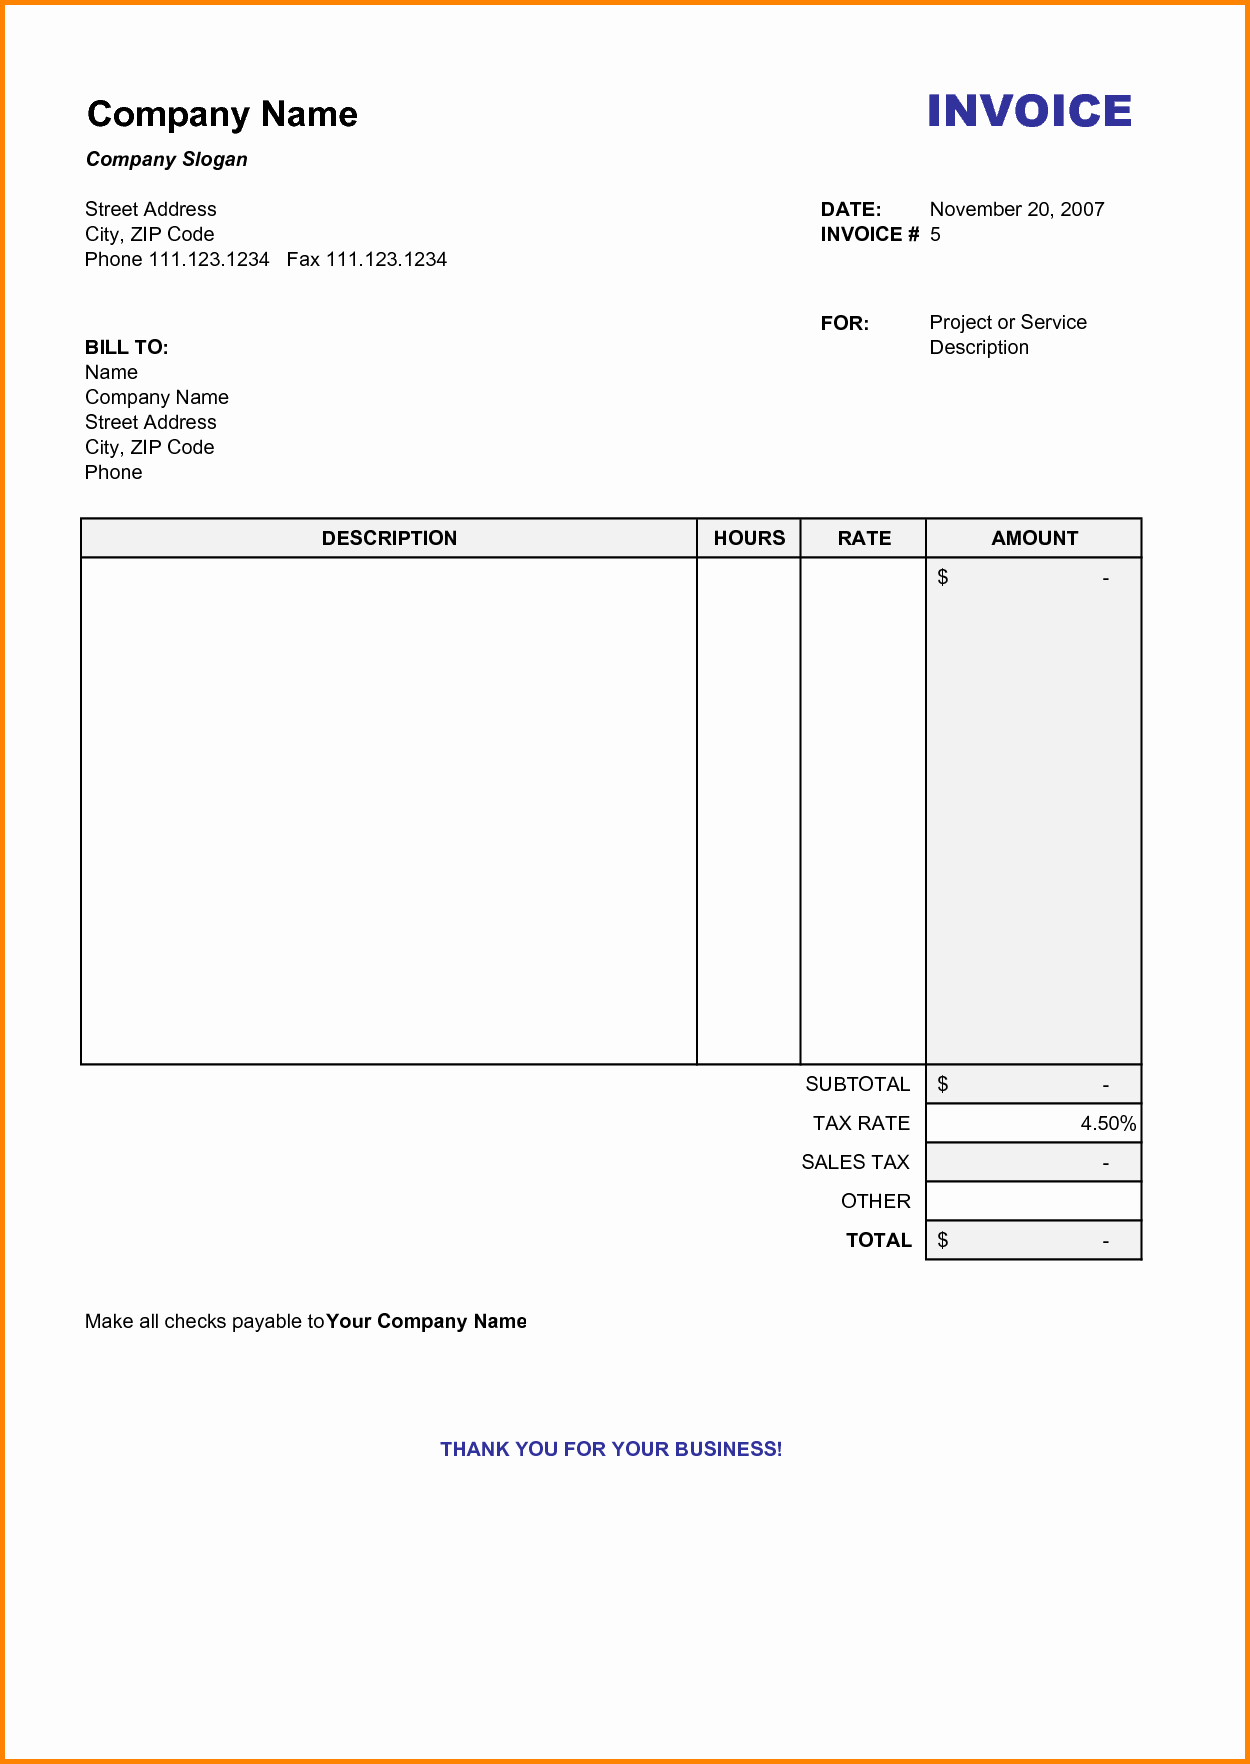 Invoice format In Word New 5 Blank Mobile Bill format In Word